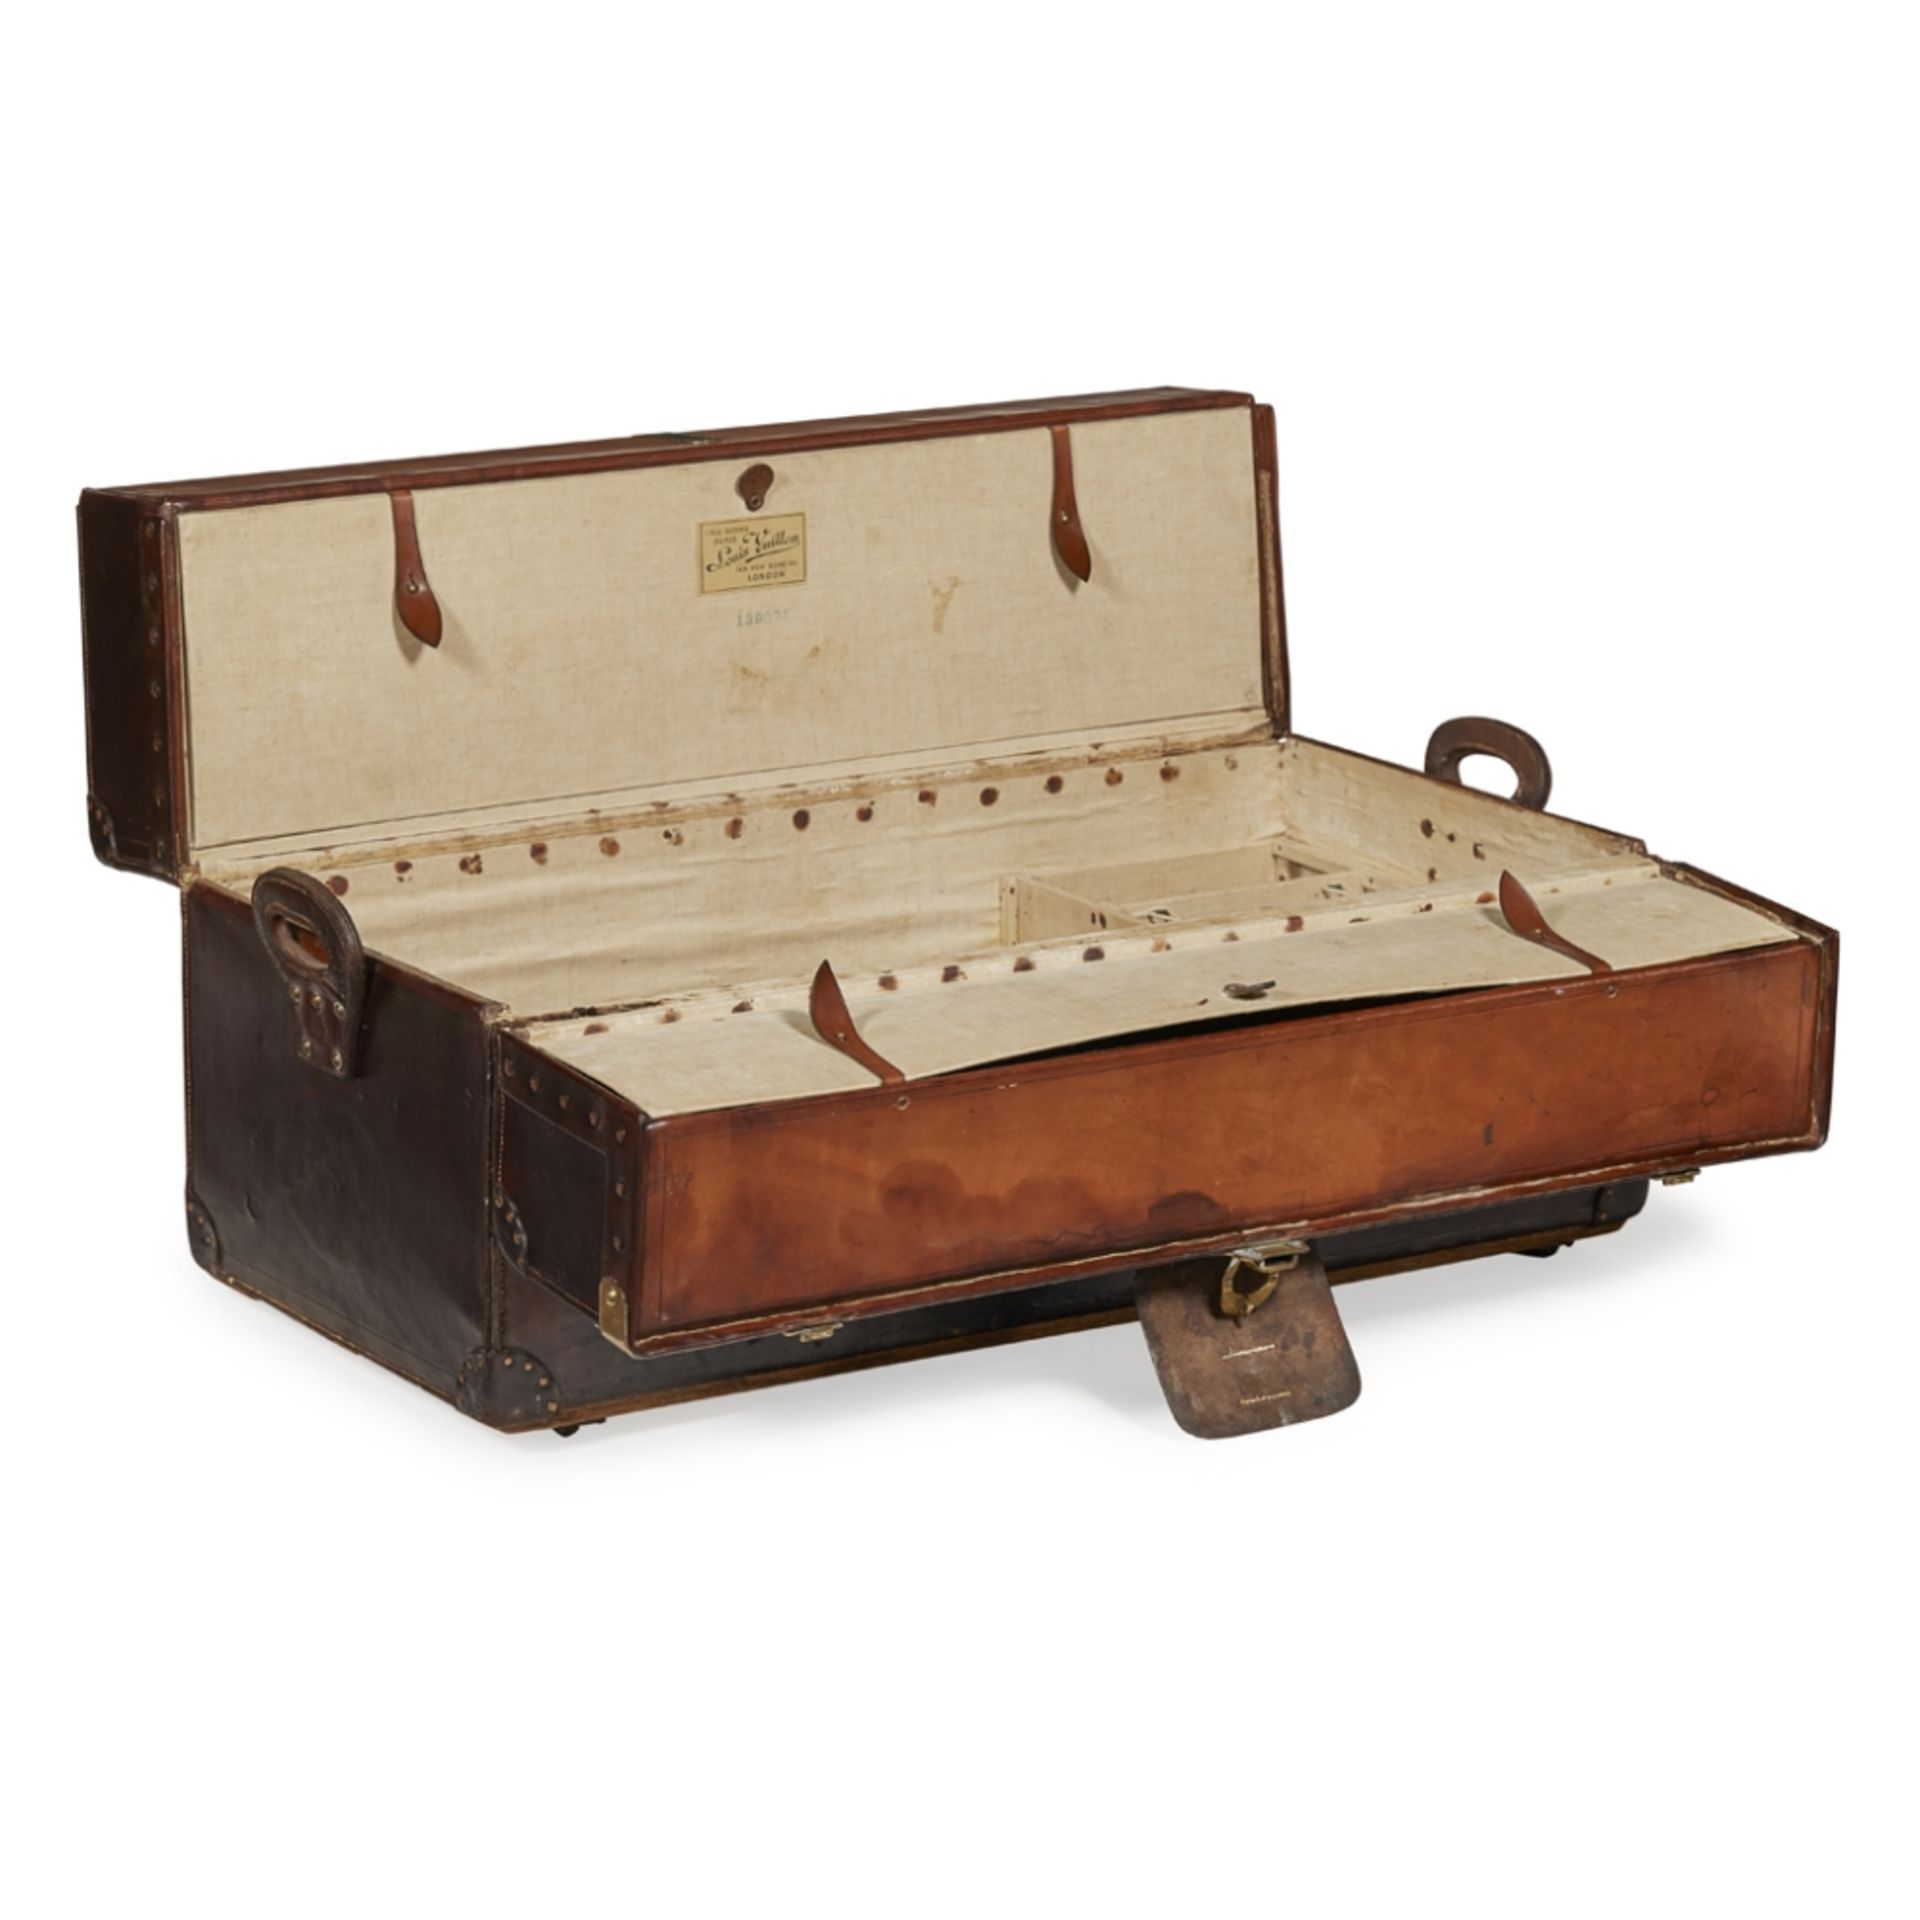 Louis Vuitton leather 'ideal' trunkLate 19th century, covered in dark brown leather with leather - Image 2 of 4